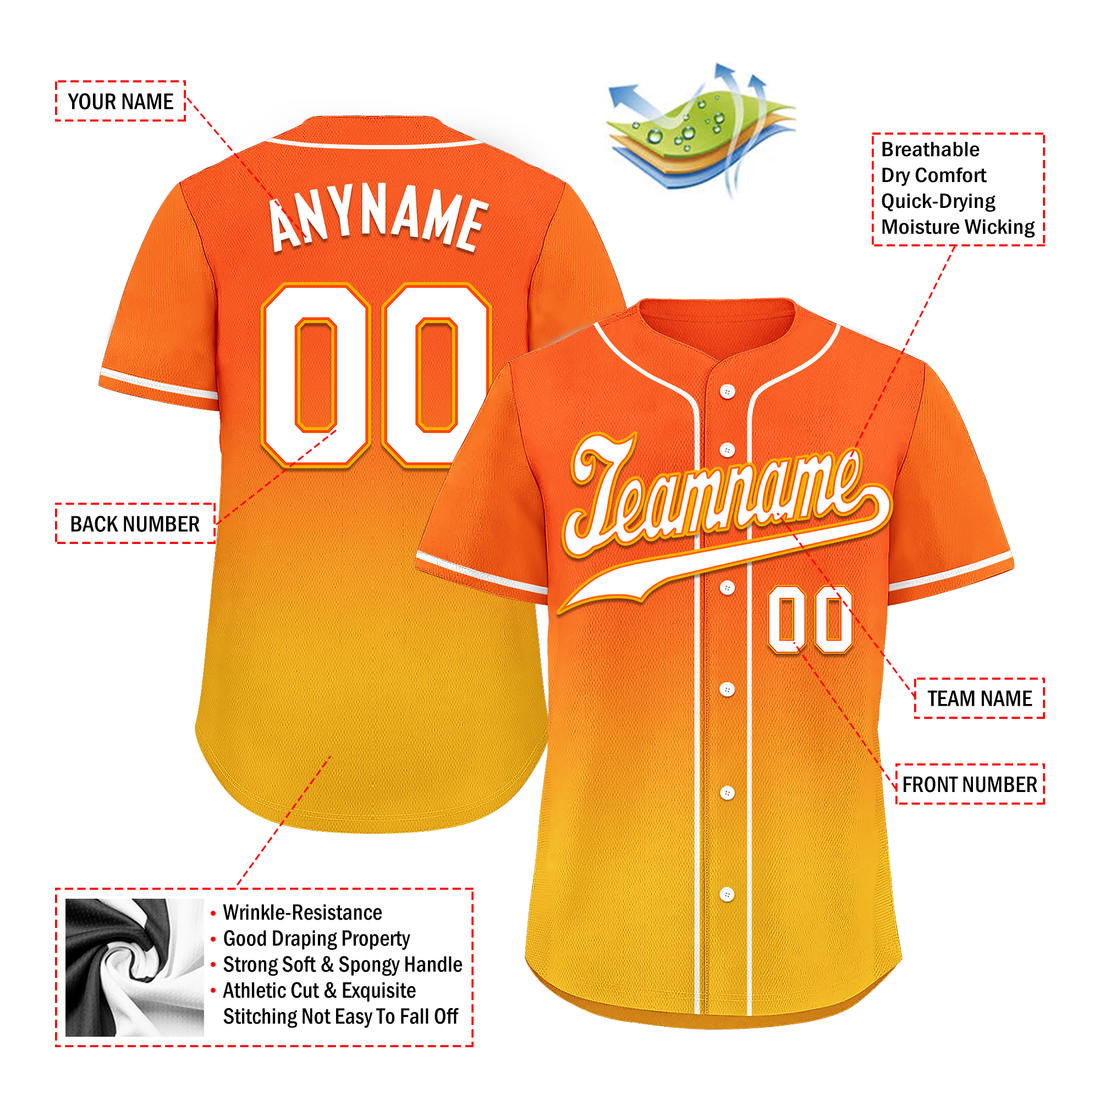 Custom Yellow Orange Fade Fashion Personalized Authentic Baseball Jersey BSBJ01-D0a70c8